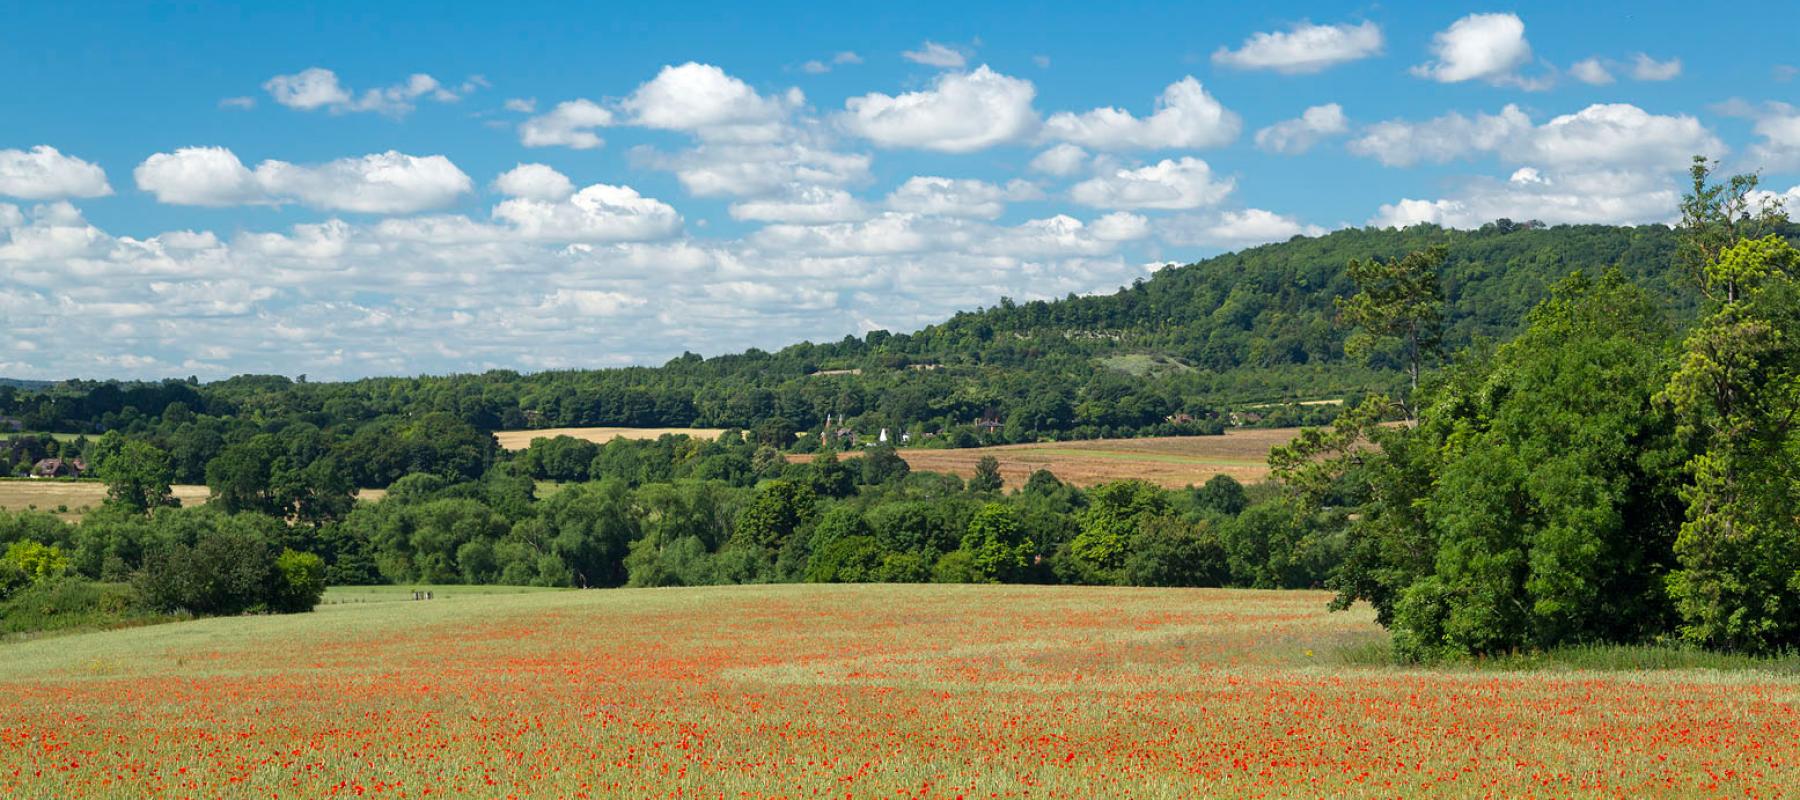 Countryside views along the Darent Valley